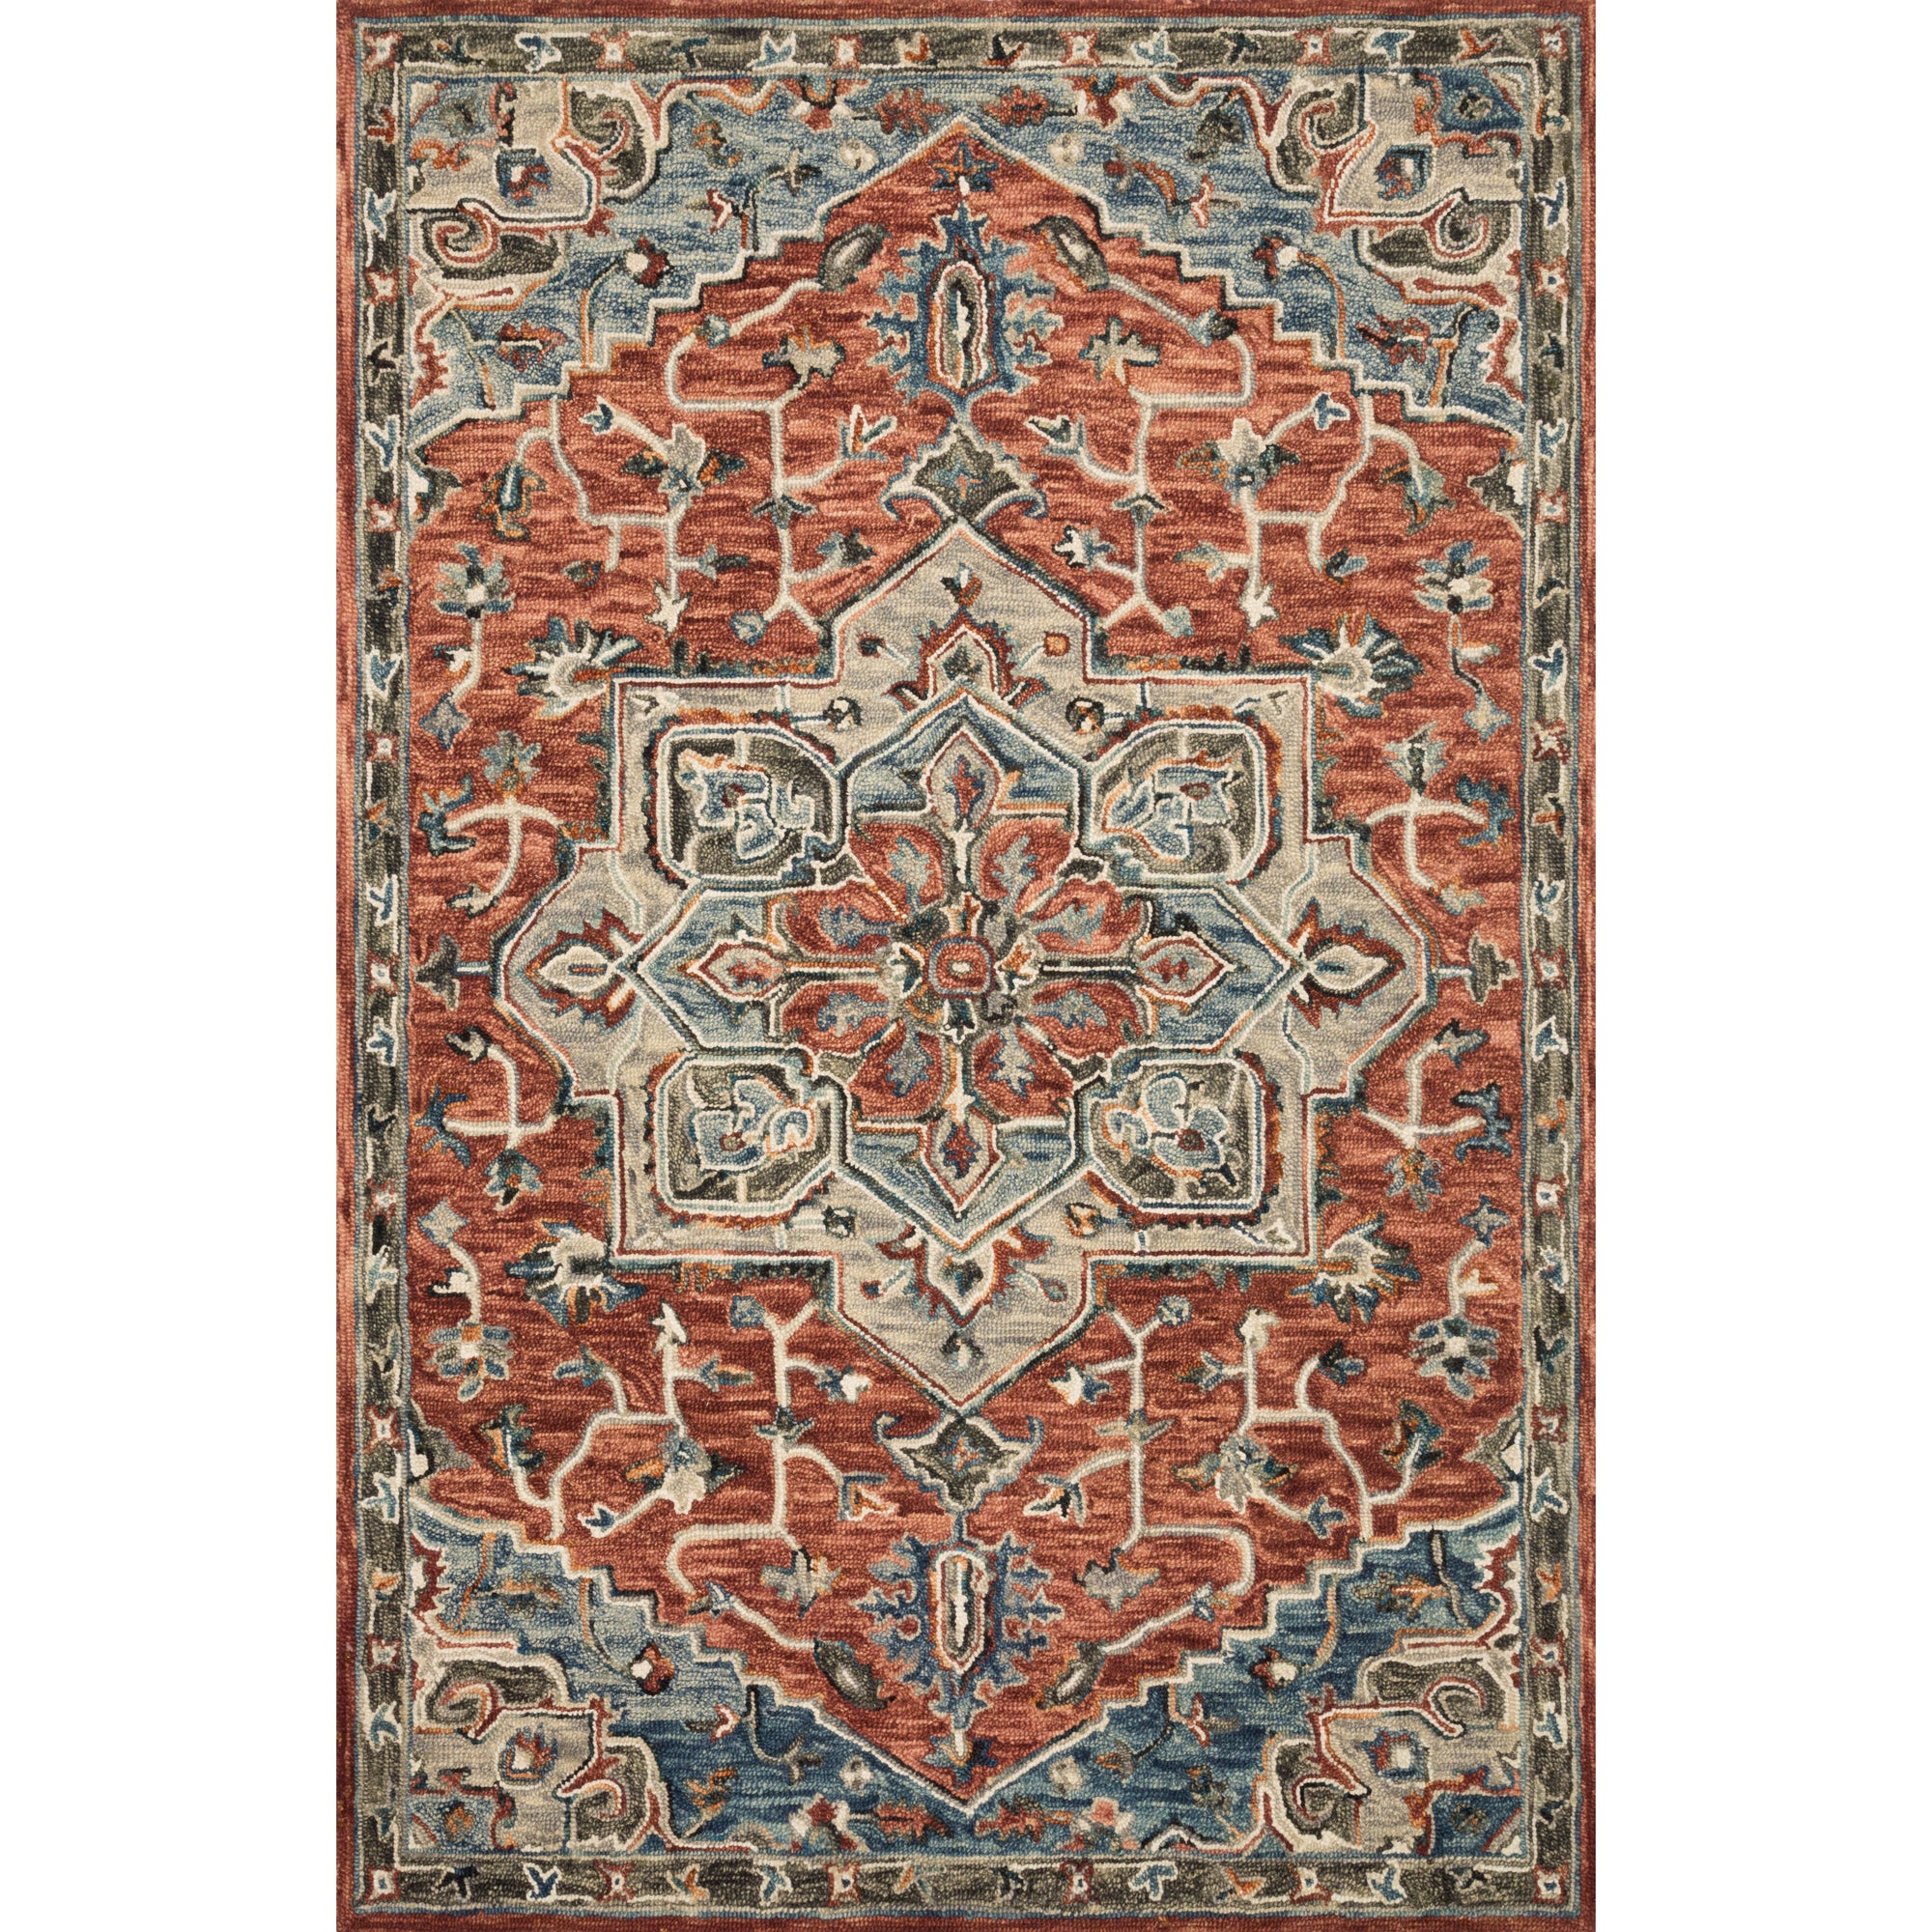 Rugs by Roo Loloi Victoria Red Multi Area Rug in size 18" x 18" Sample